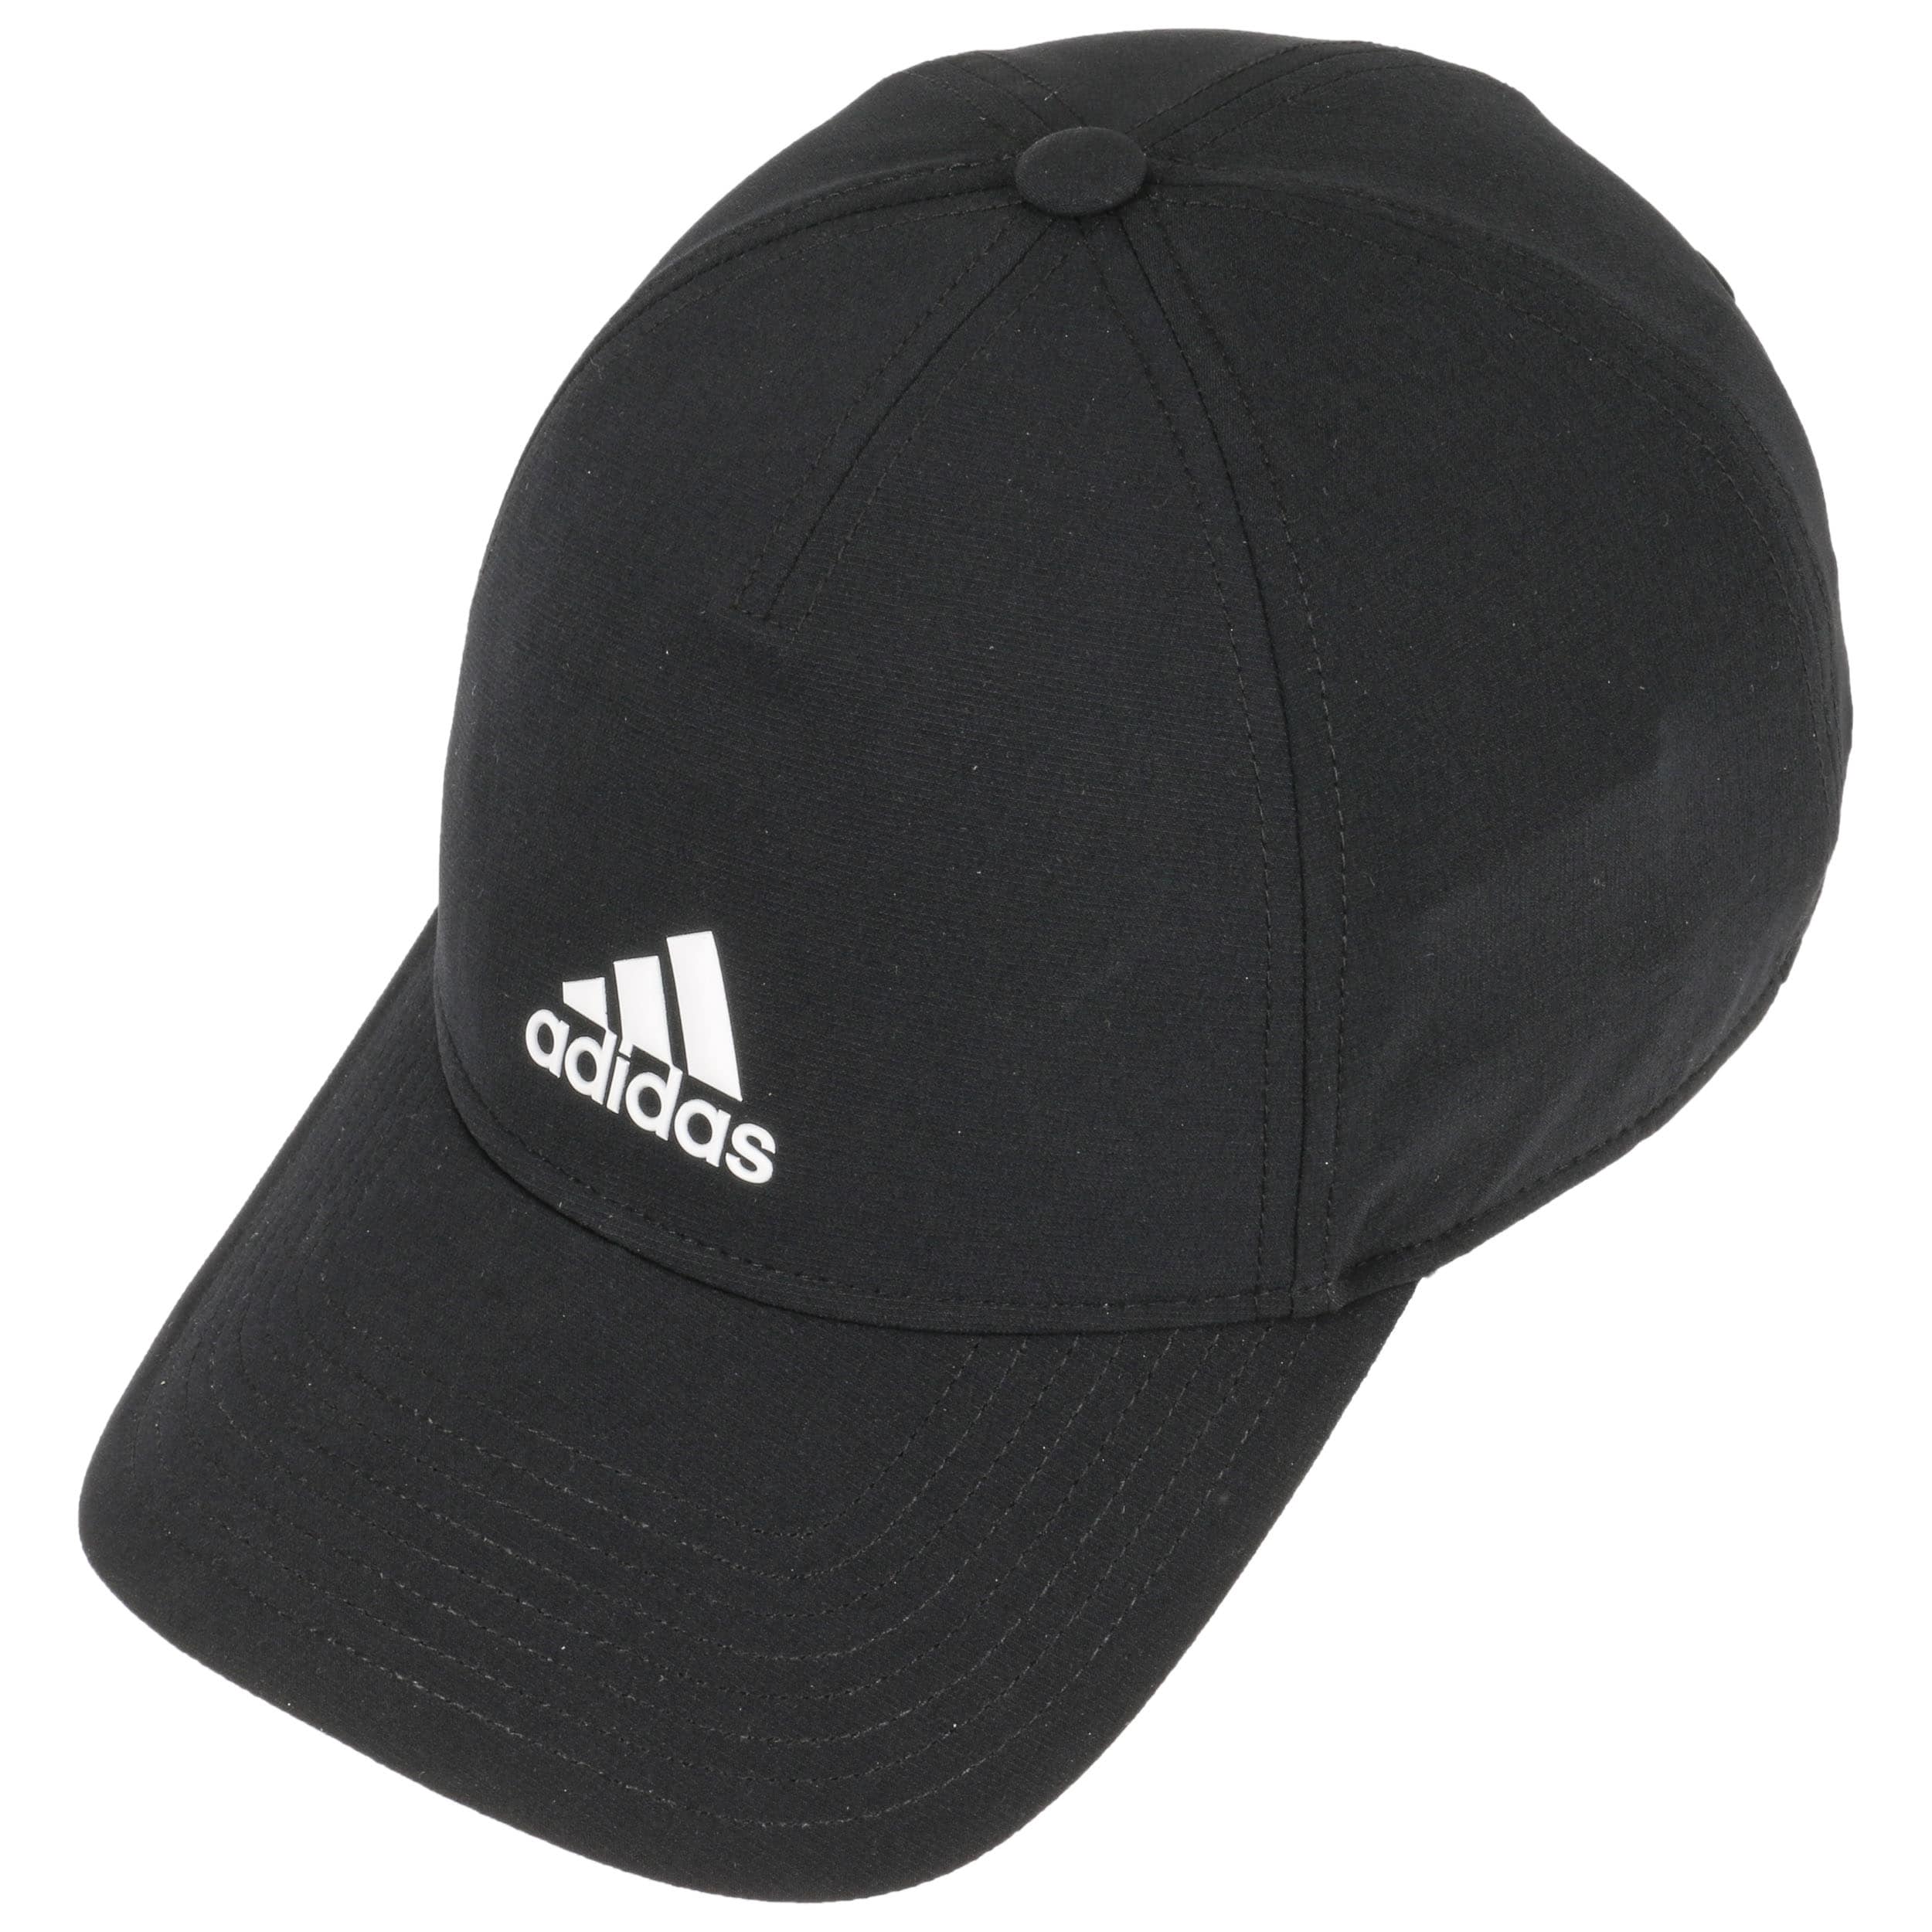 C40 5P Climalite Cap by adidas - 19,95 €